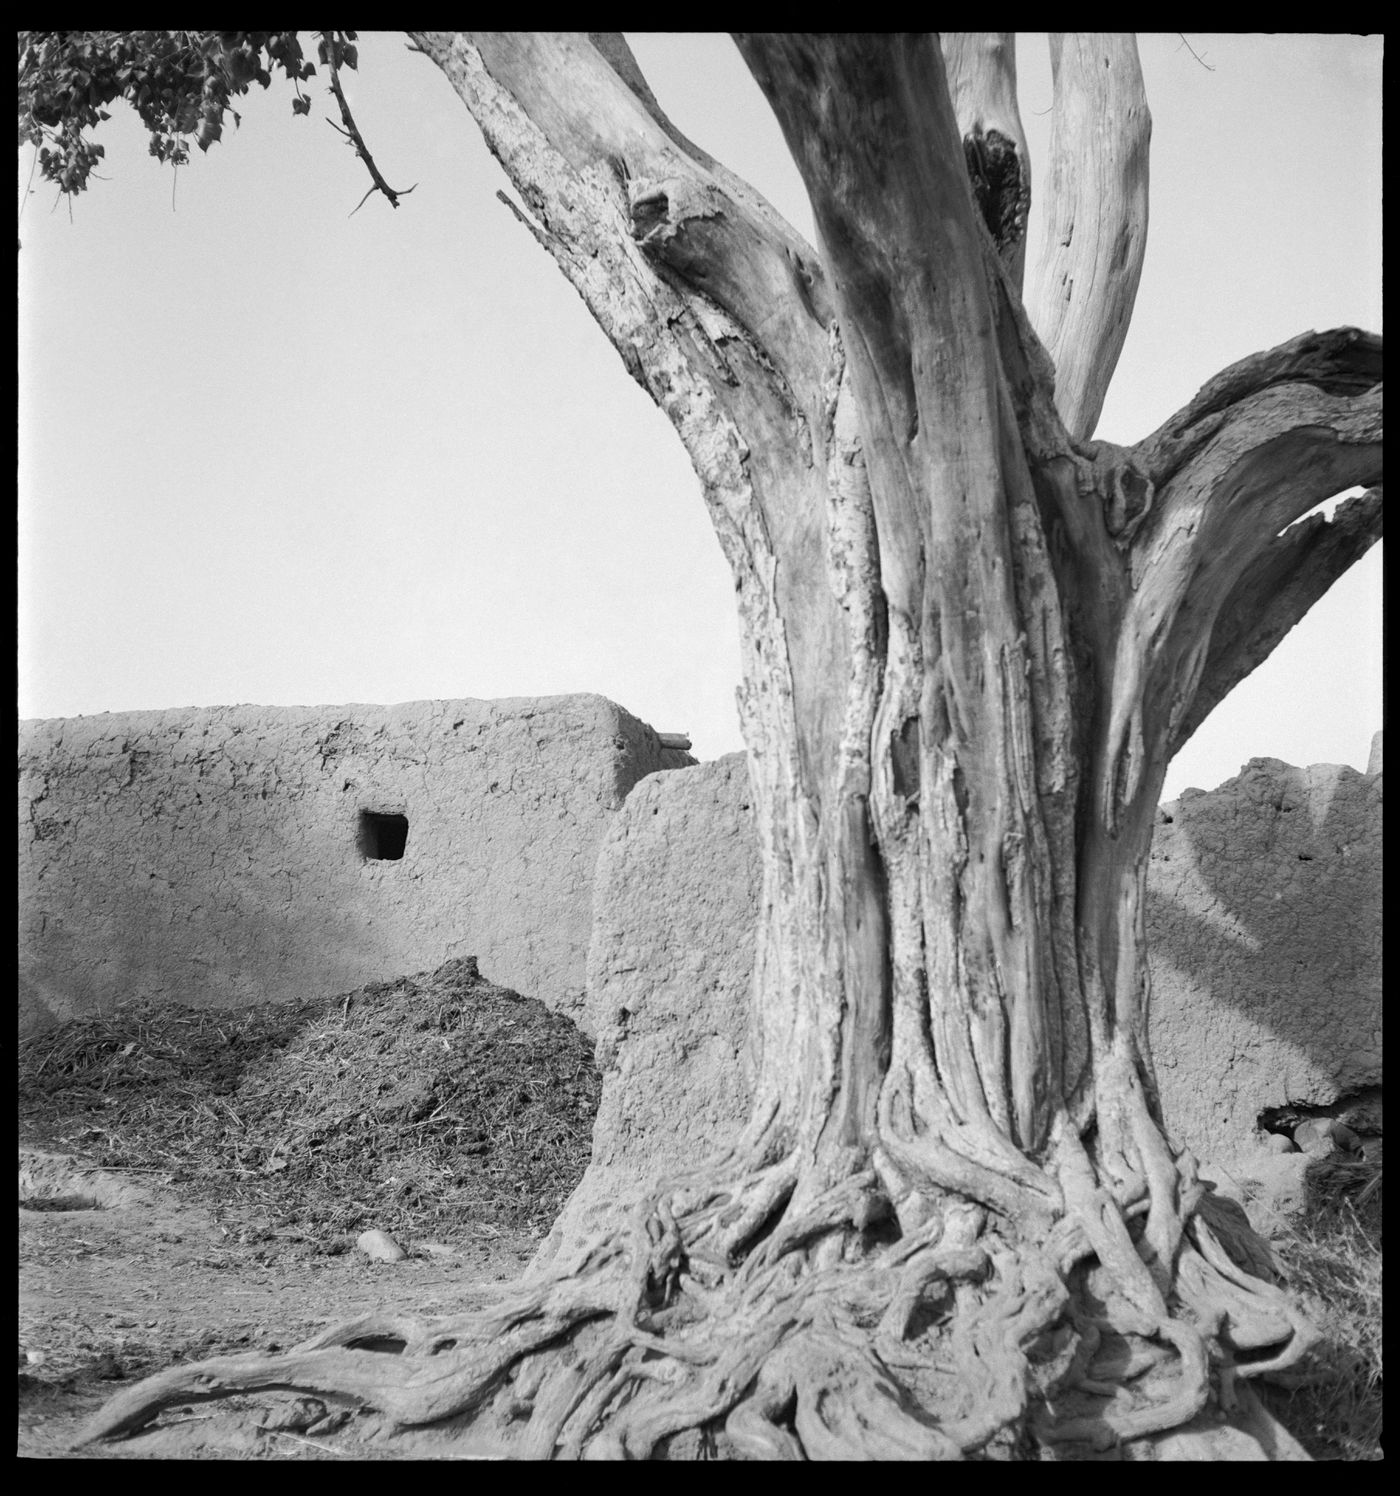 Tree near a rural house in Chandigarh's area before the construction, India